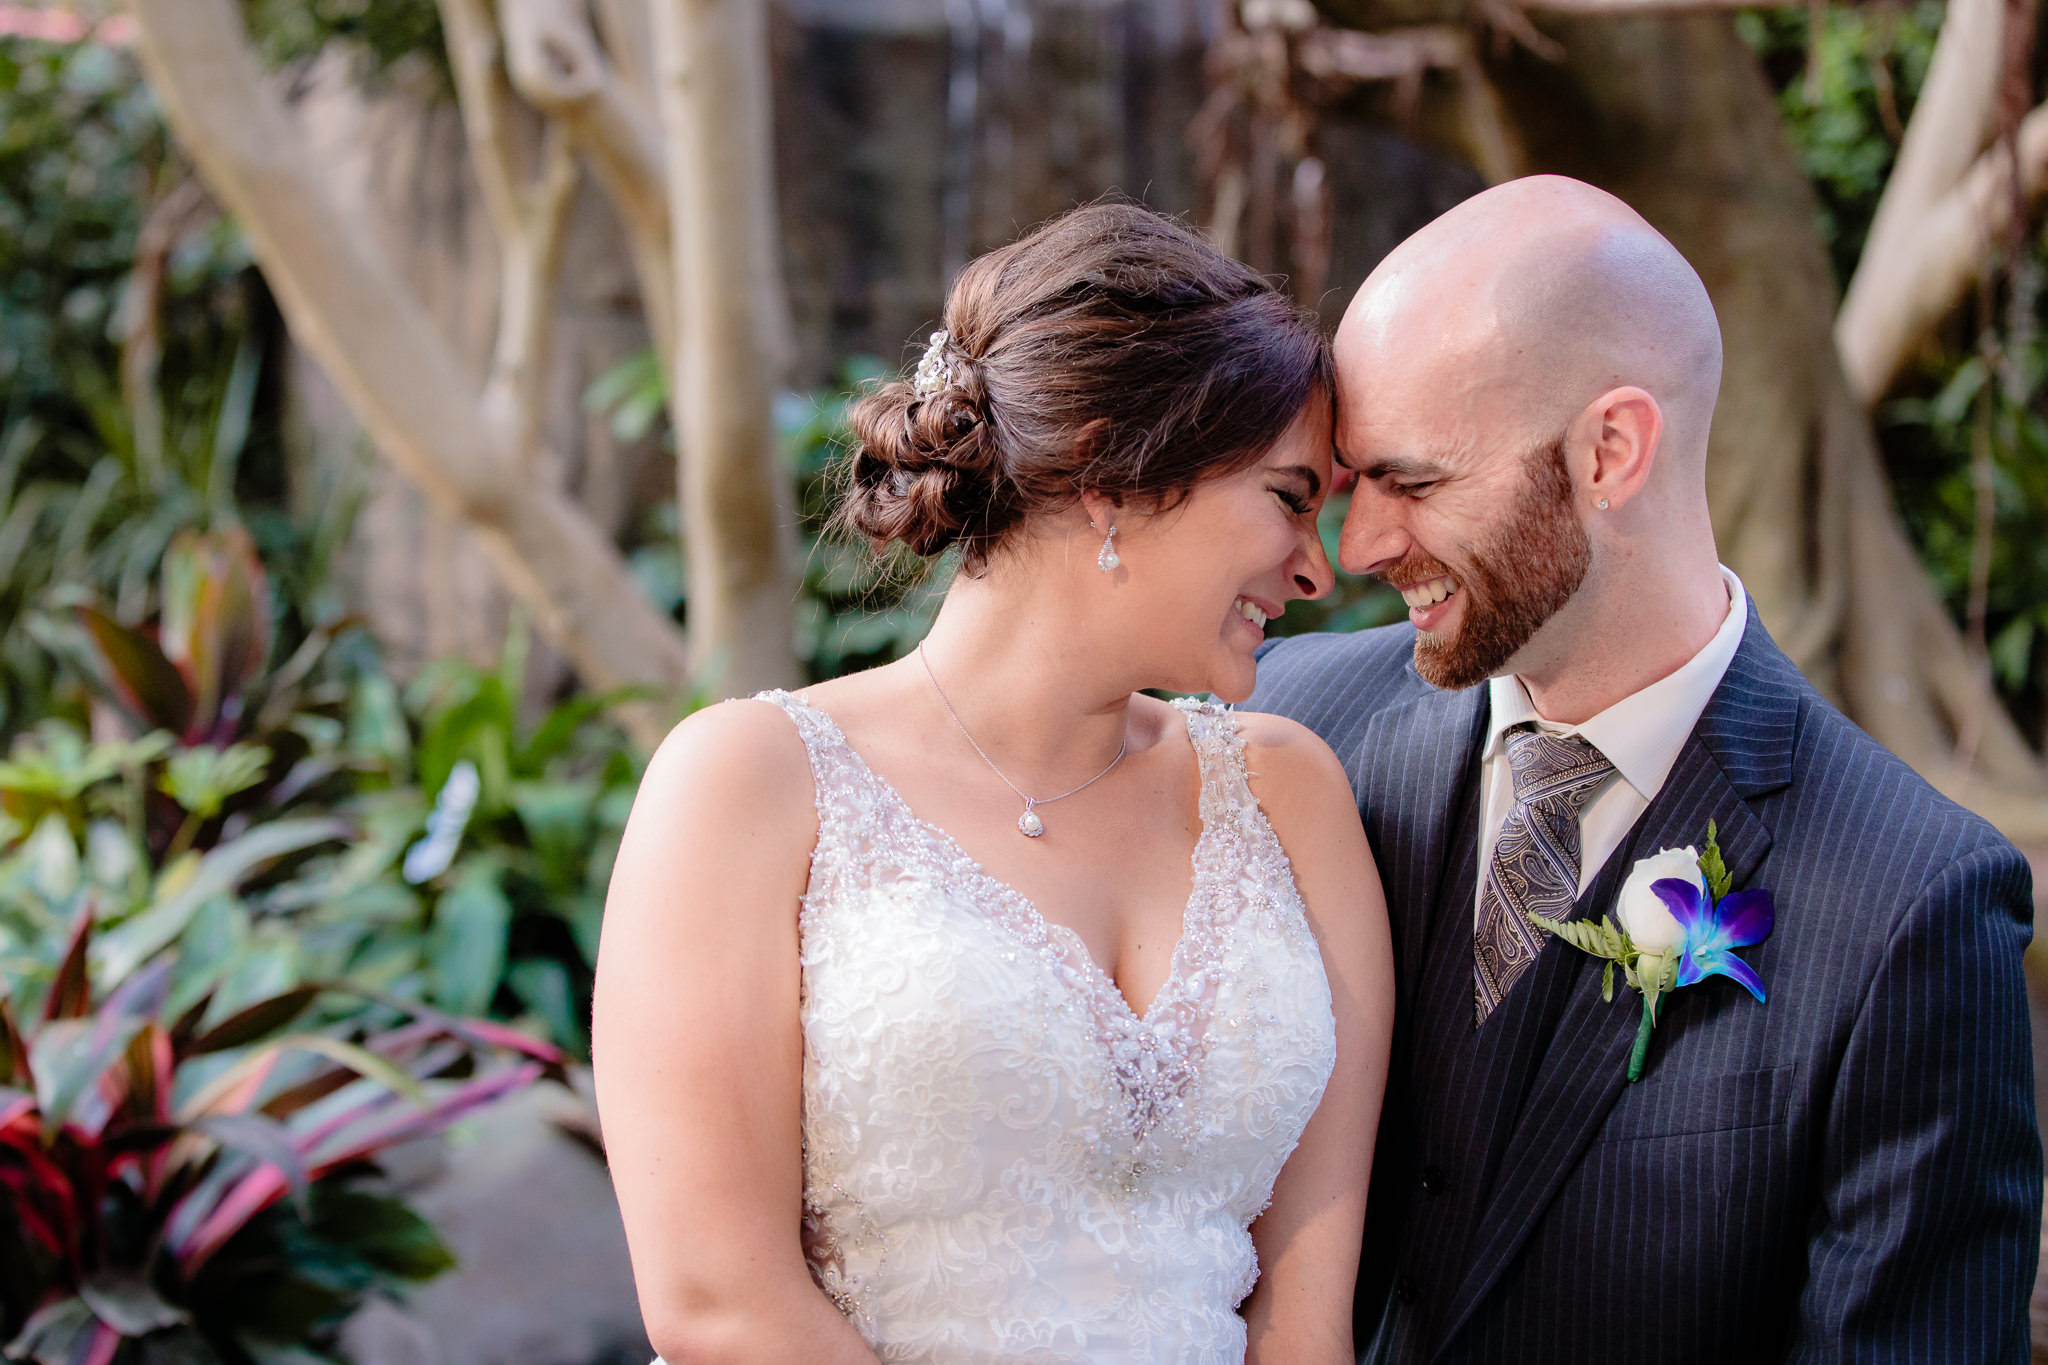 Bride & groom laugh together in the Tropical Rainforest at the National Aviary